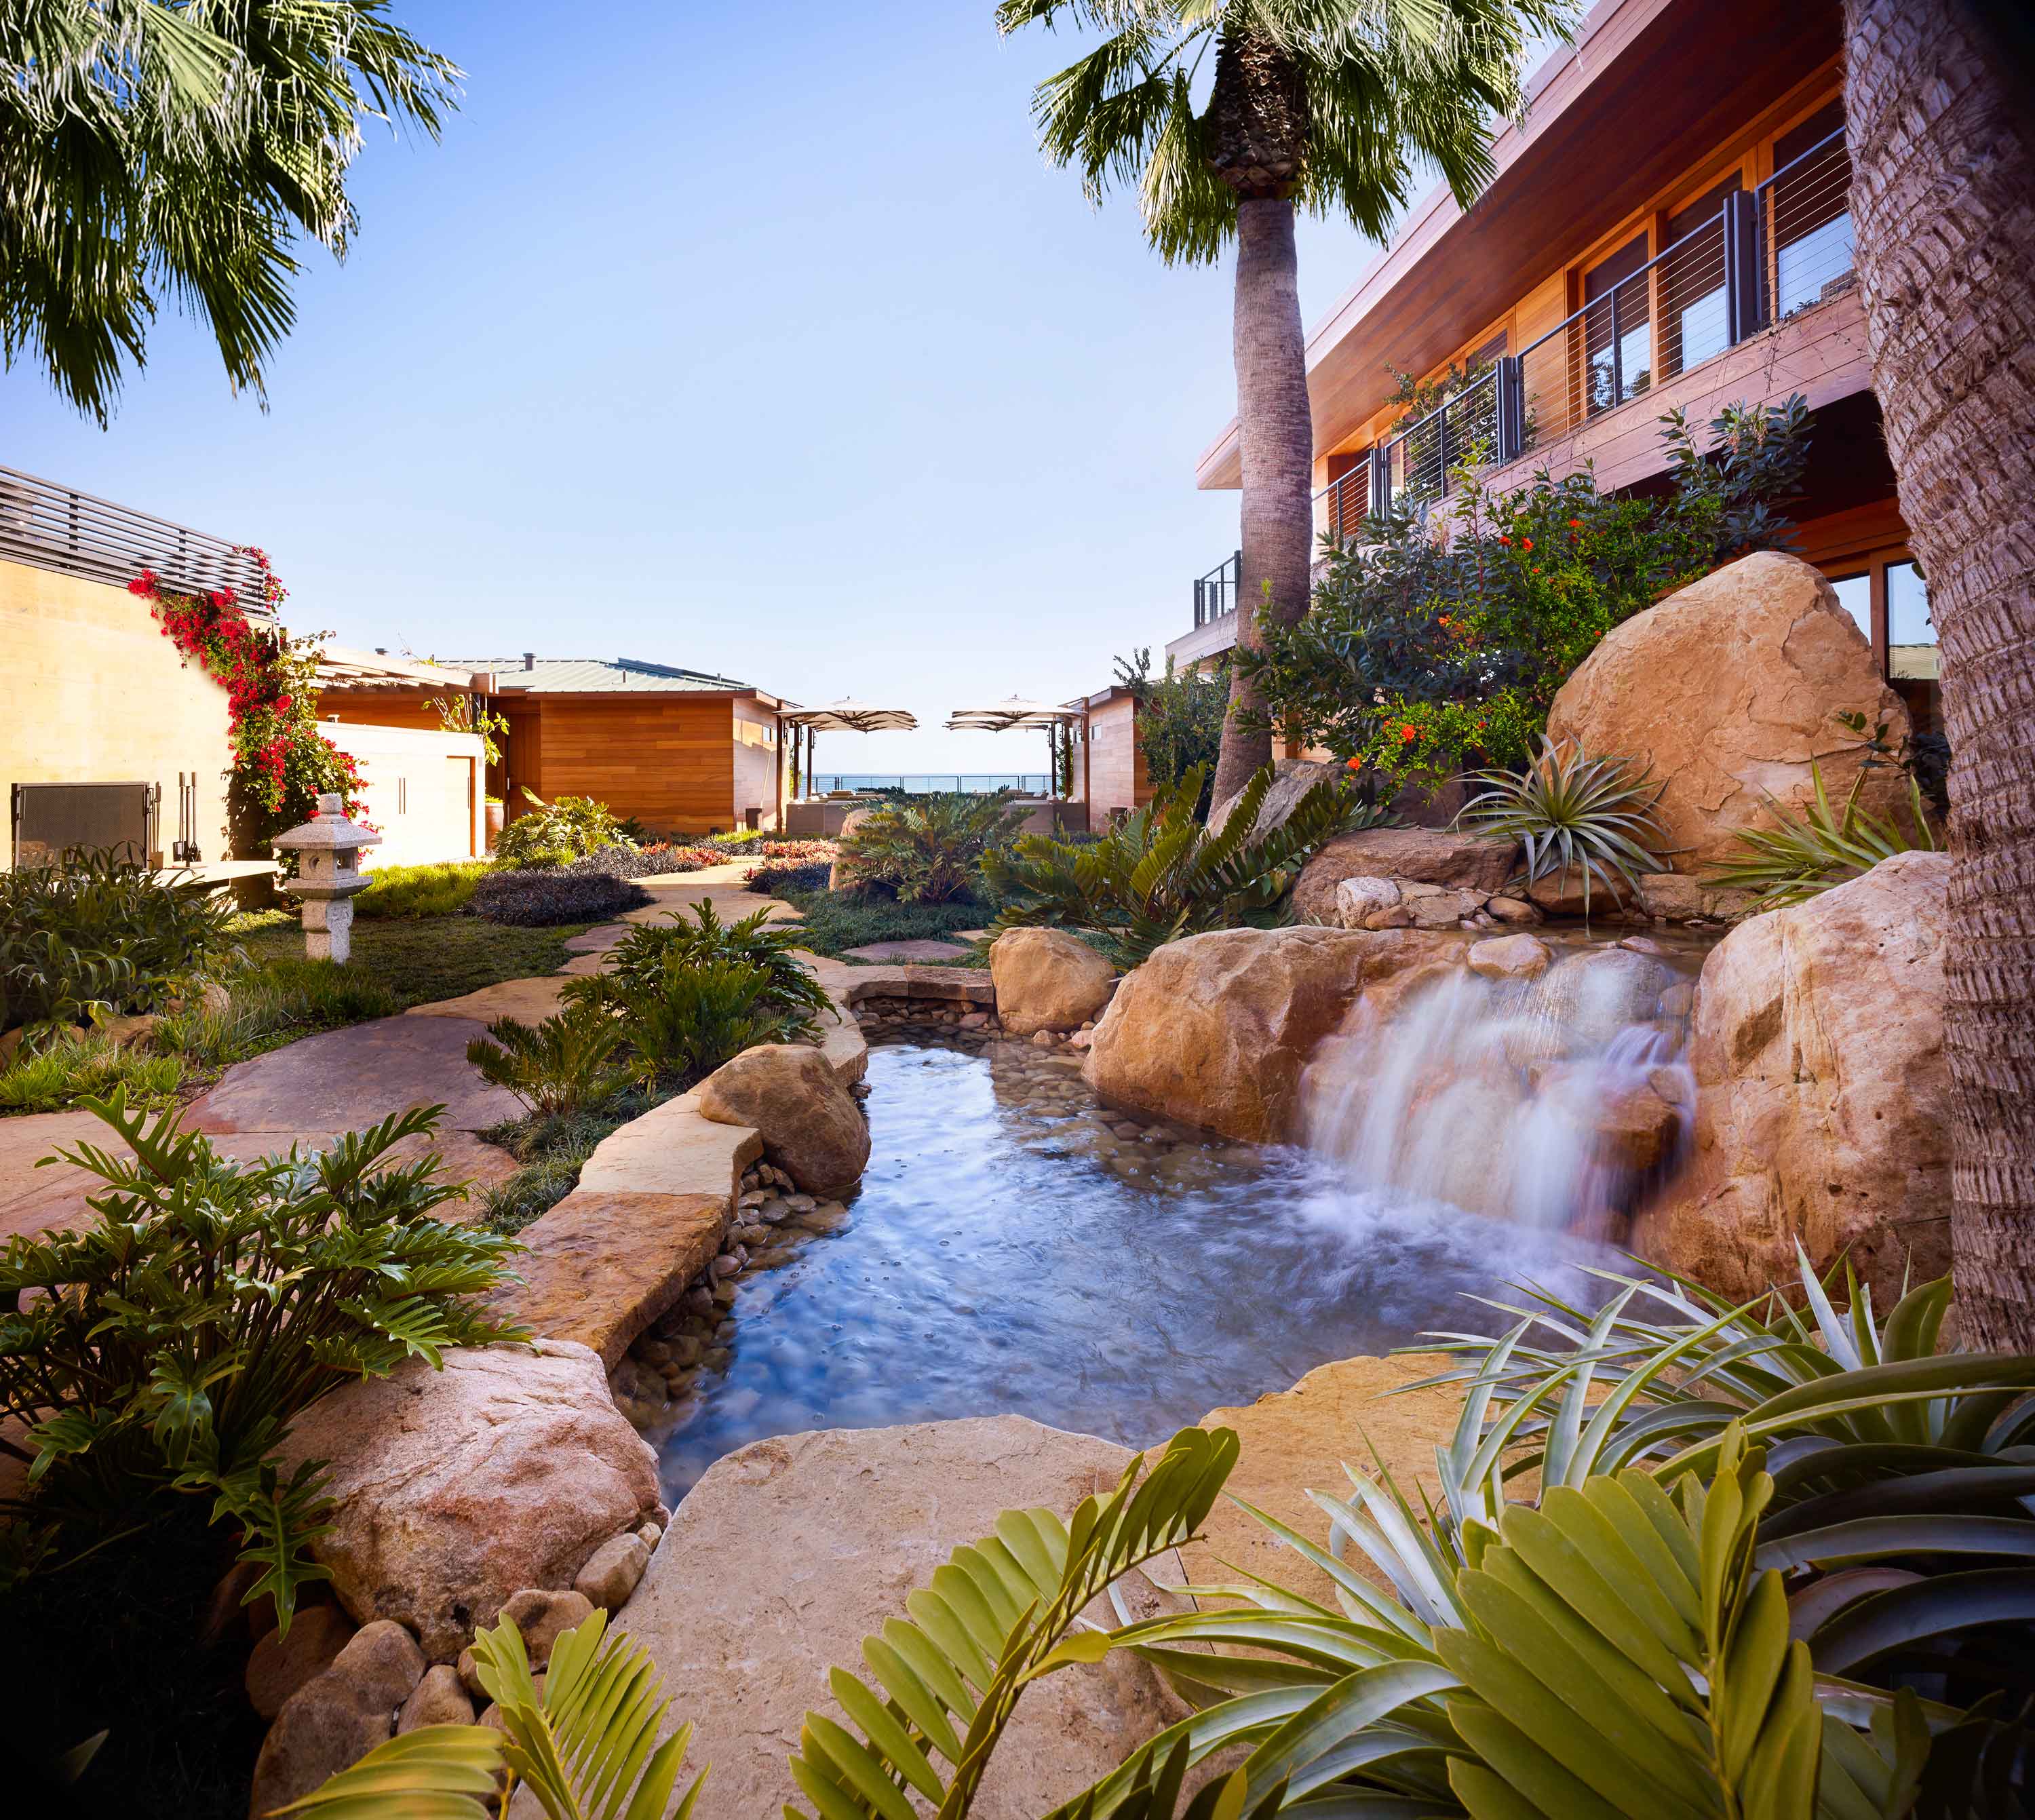 Ocean view courtyard of Nobu Ryokan Malibu with waterfall pond, exterior of the building and palm trees